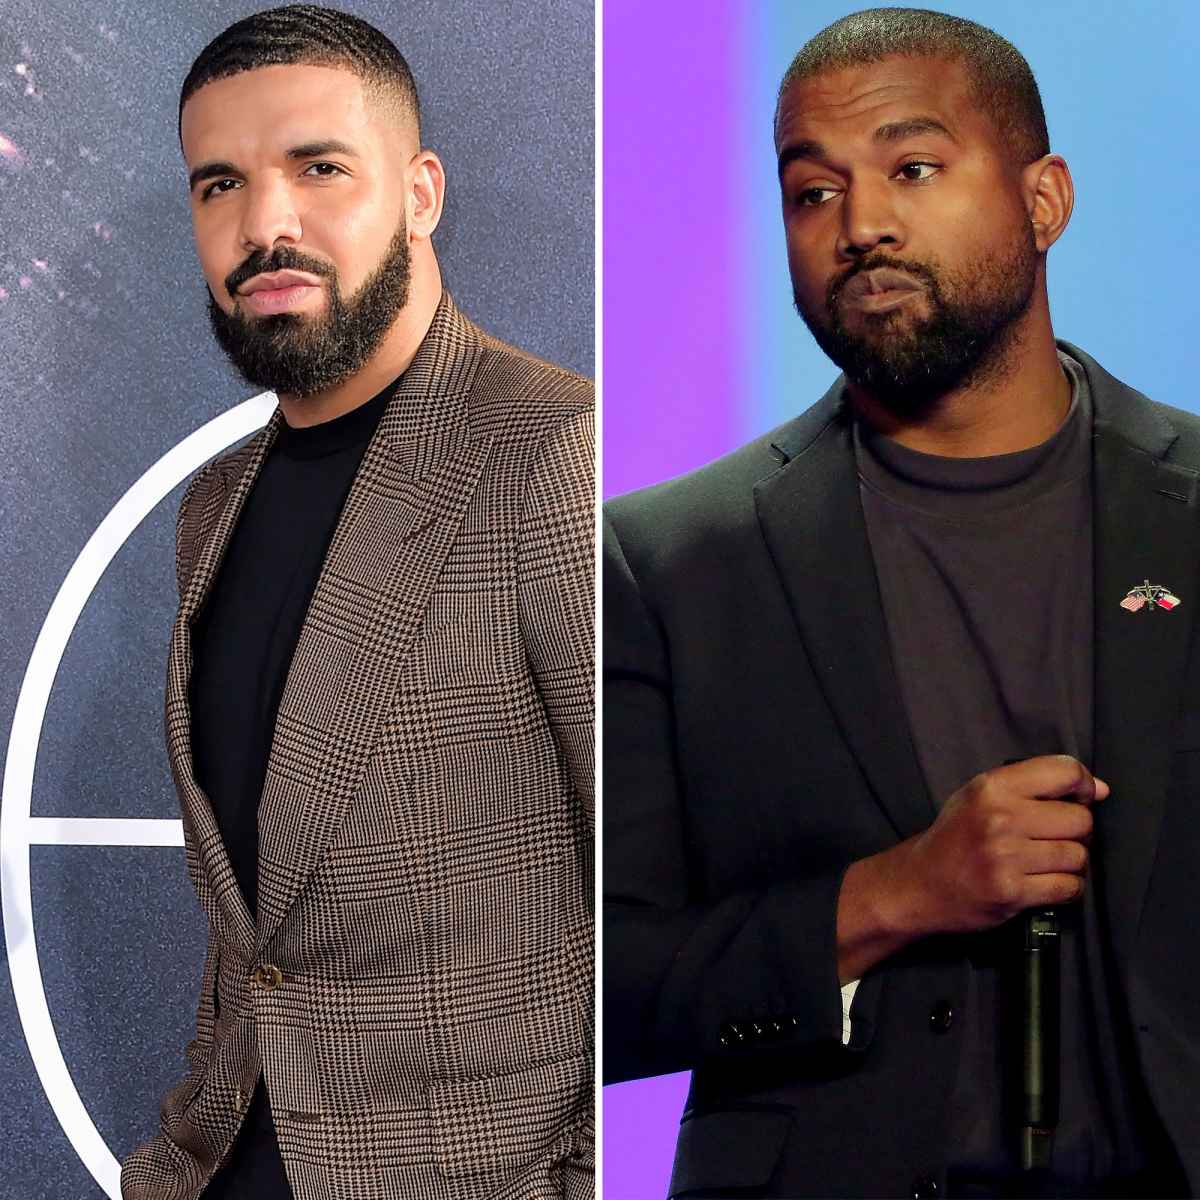 Kanye West vs Drake Feud: Everything to Know About Their Beef